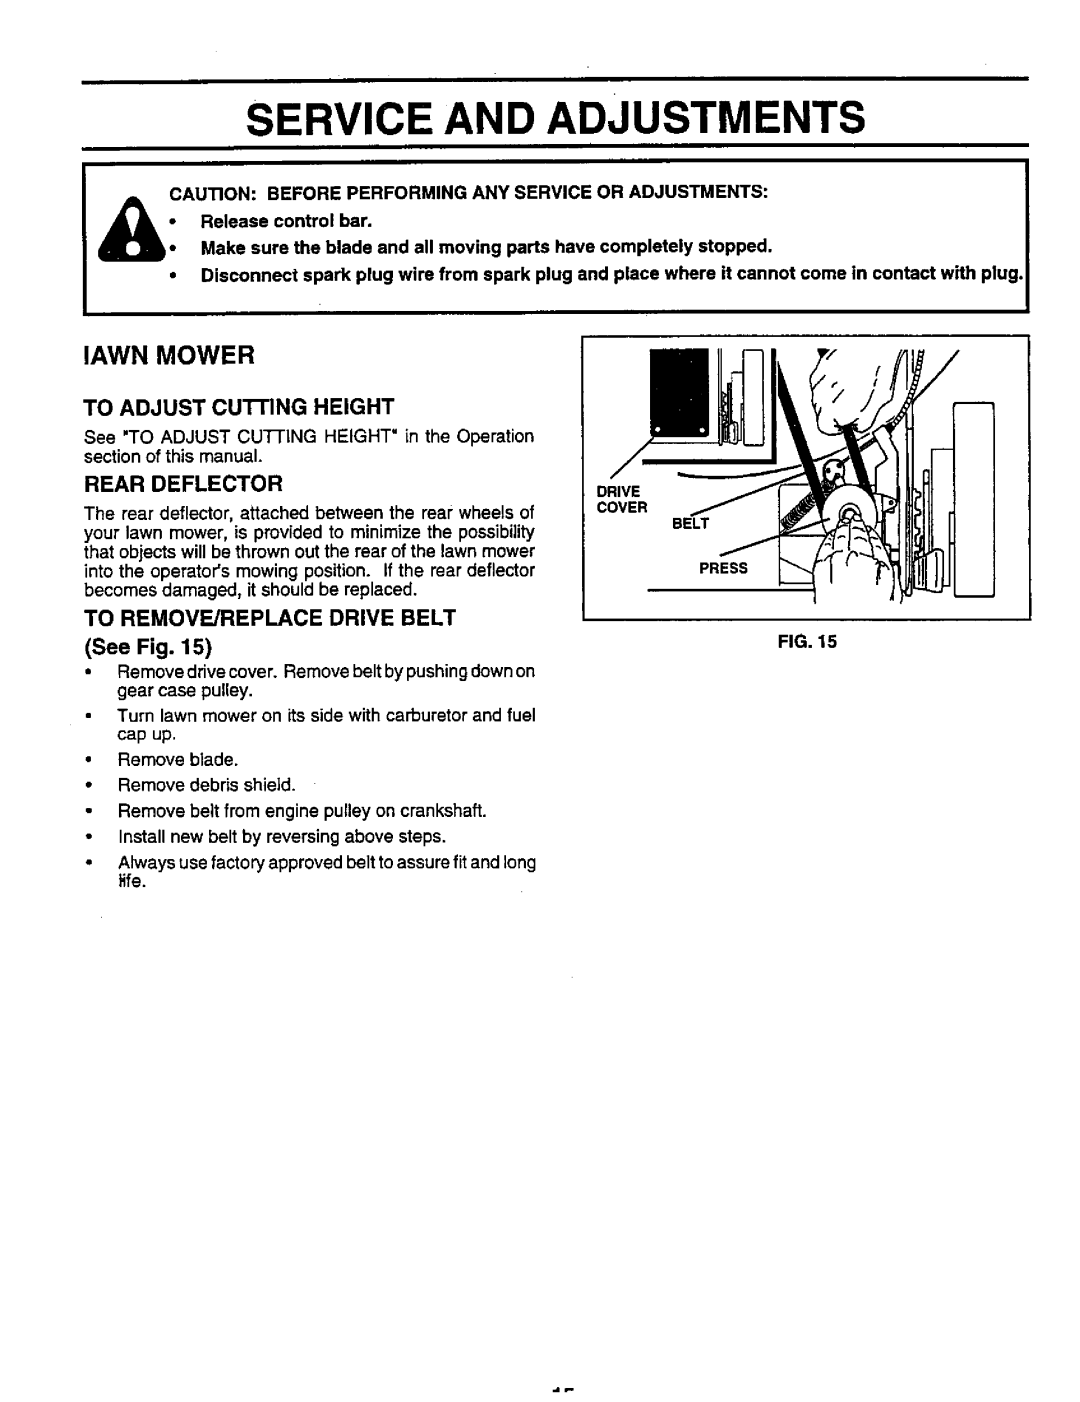 Sears 917.373981 owner manual Service And Adjustments, lAWN MOWER, See Fig, TO ADJUST CUI-rlNGHEIGHT, Rear Deflector 